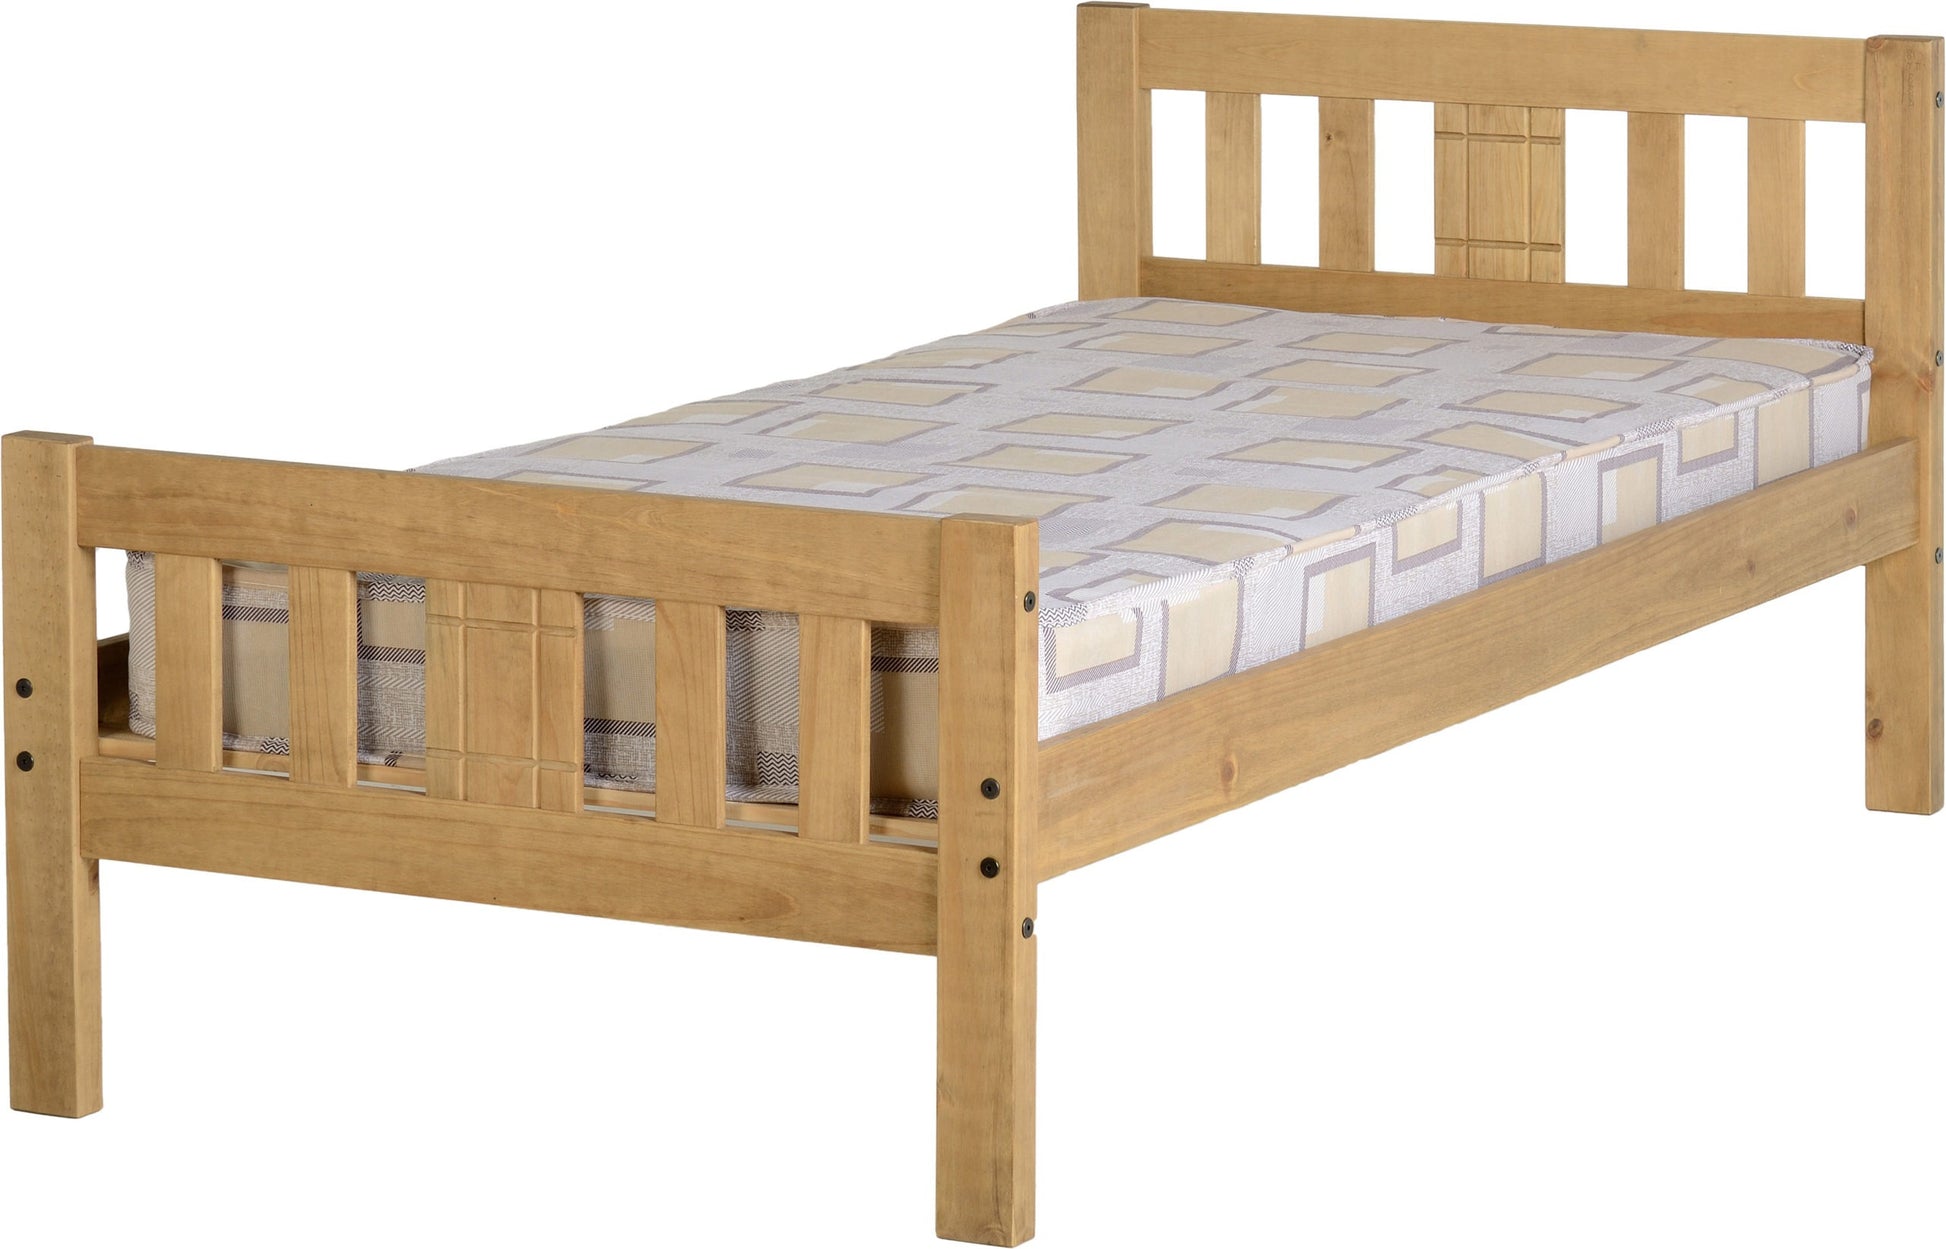 LRG_RIO_3ft_BED_200-201-034-scaled.jpg